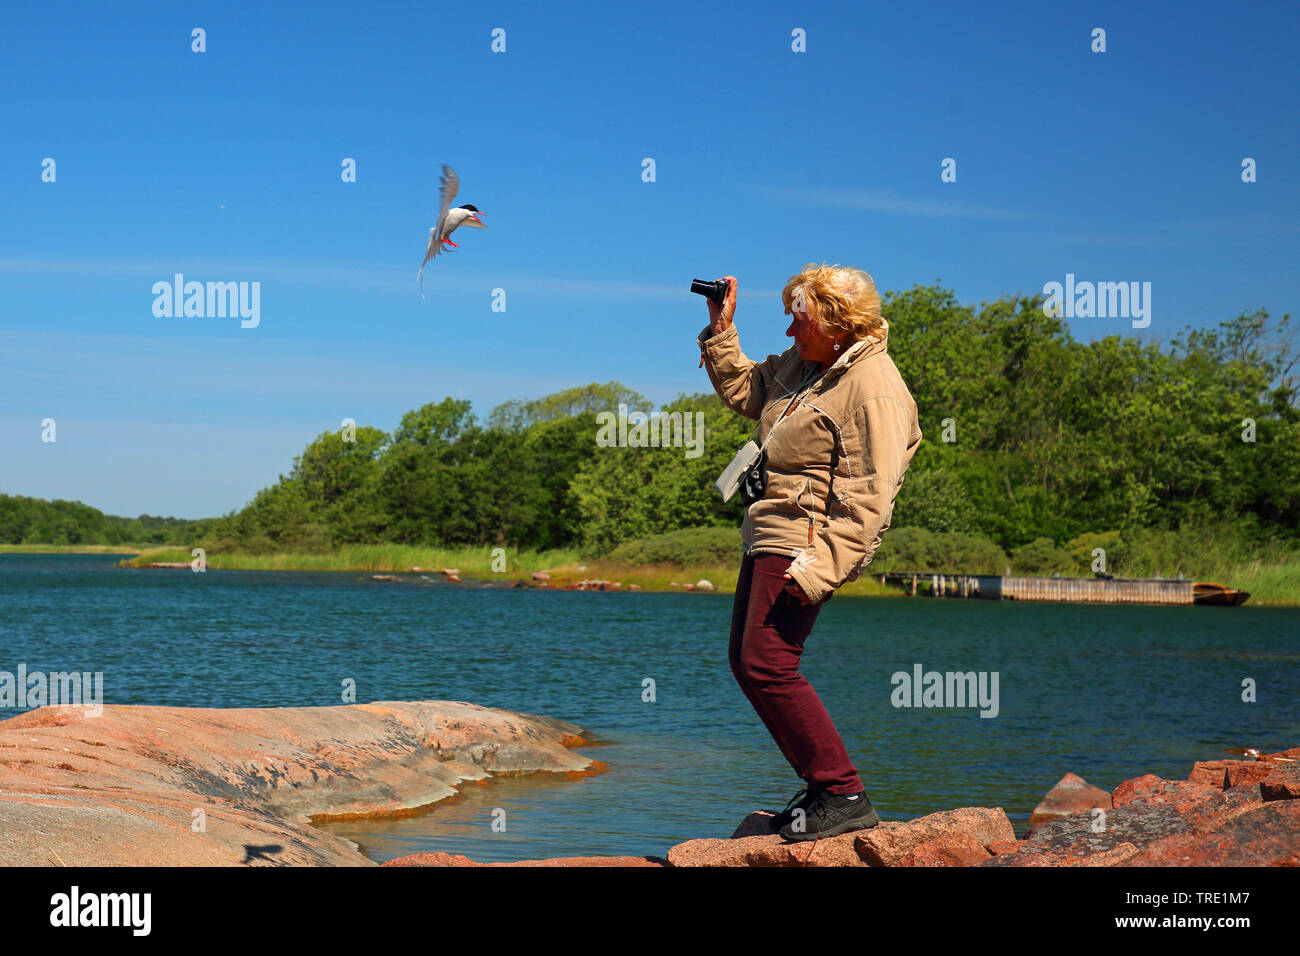 arctic tern (Sterna paradisaea), woman photographing an arctic tern that does not want to be photographed, Finland, Aland Stock Photo